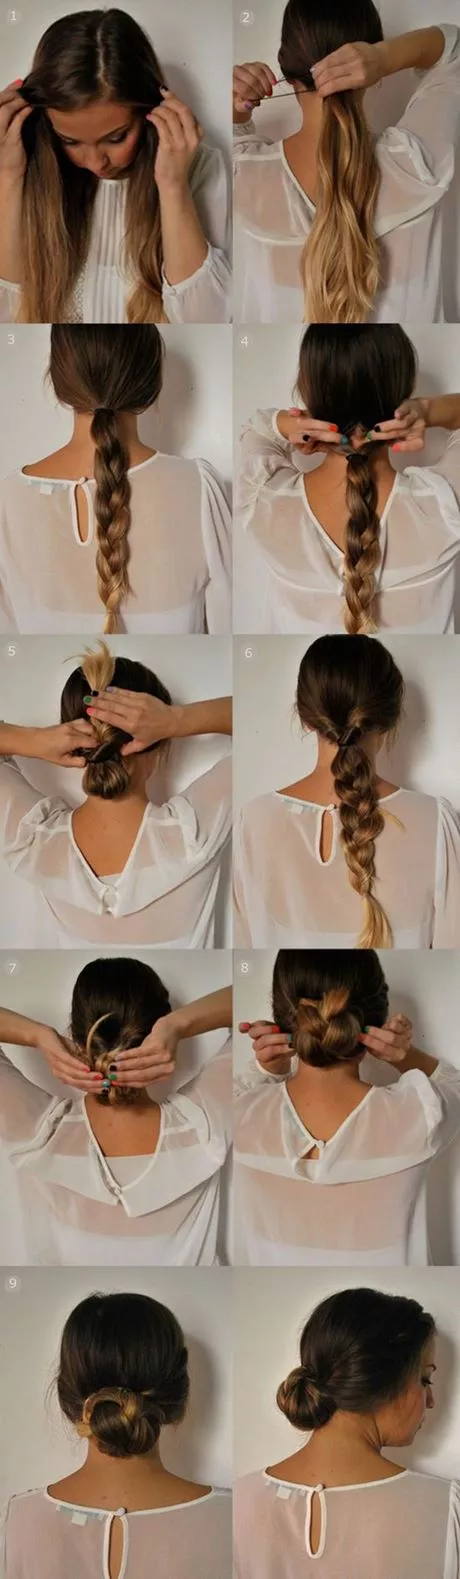 Simple hairstyles for work simple-hairstyles-for-work-98_10-2-2